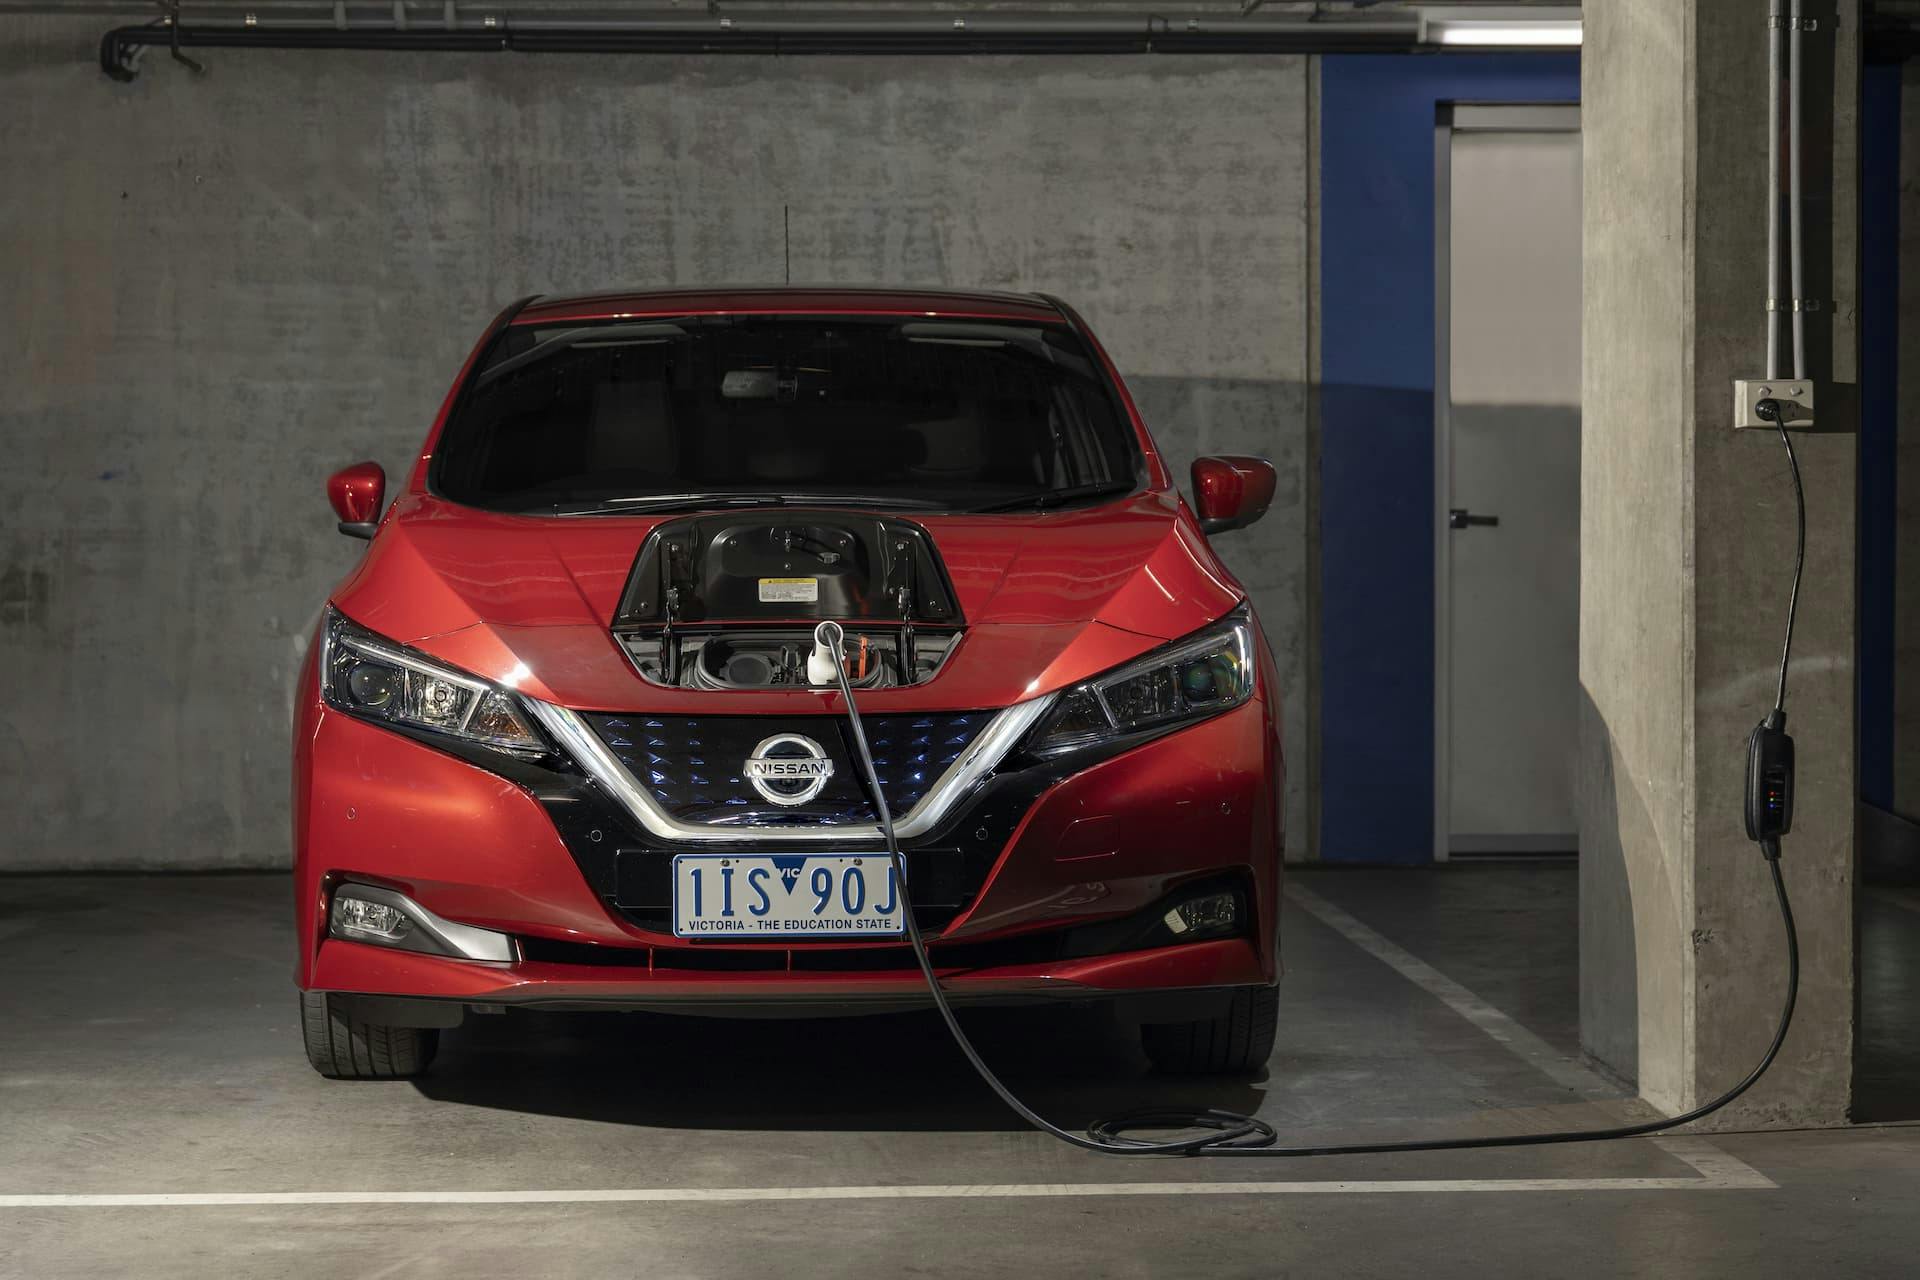 Red Nissan Leaf charging from powerpoint in basement garage